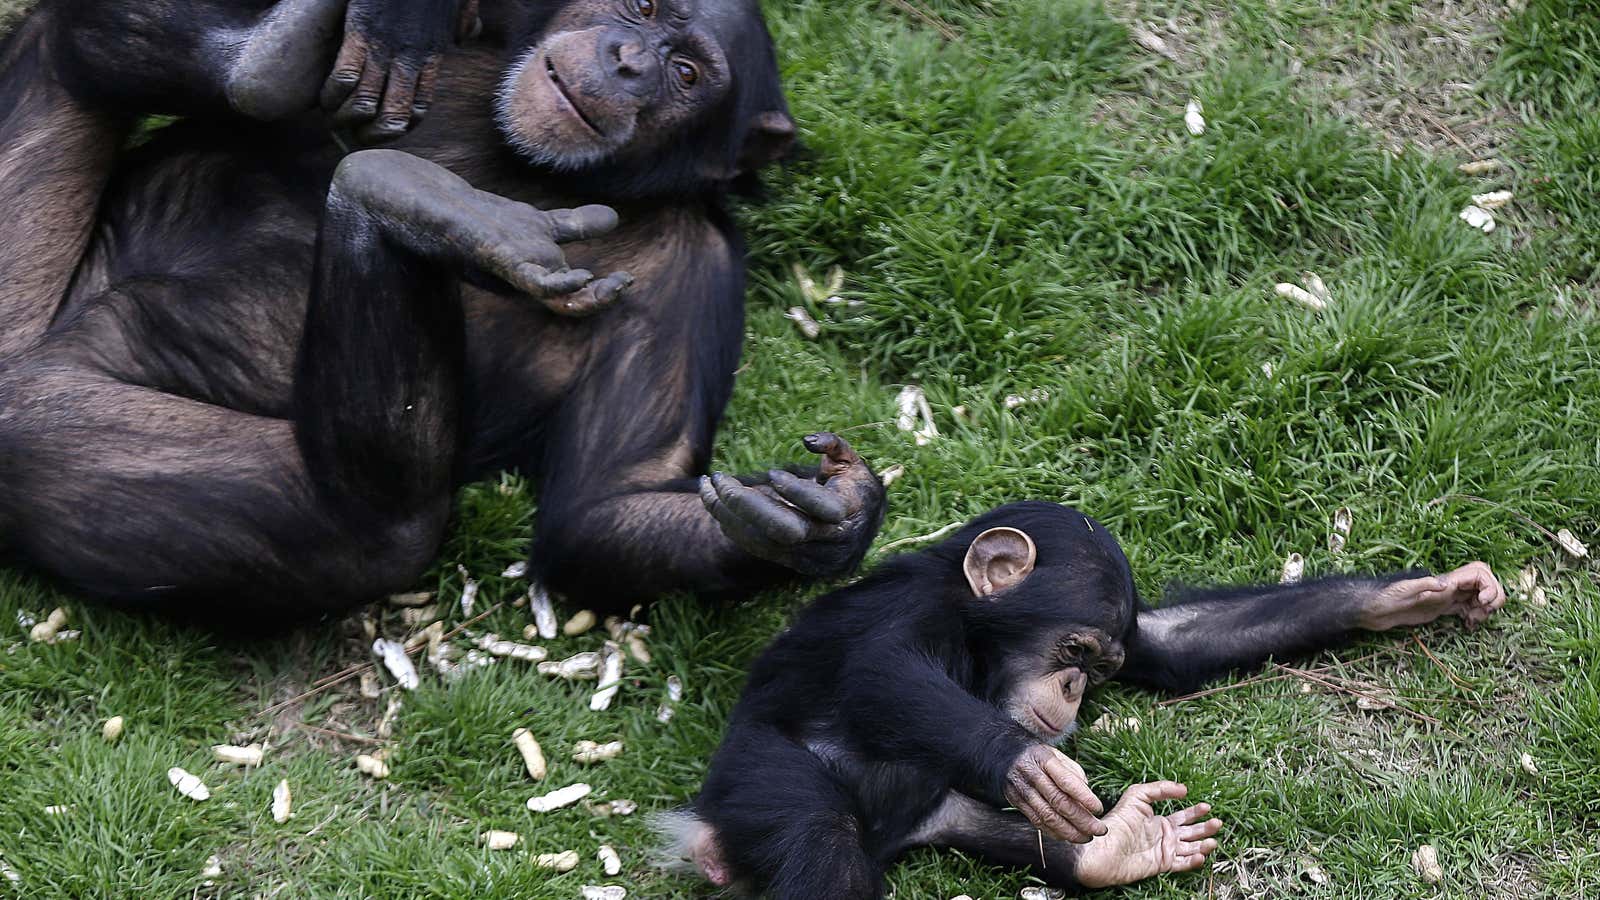 If chimpanzees can experience pleasure or pain, does that mean they’re people too?